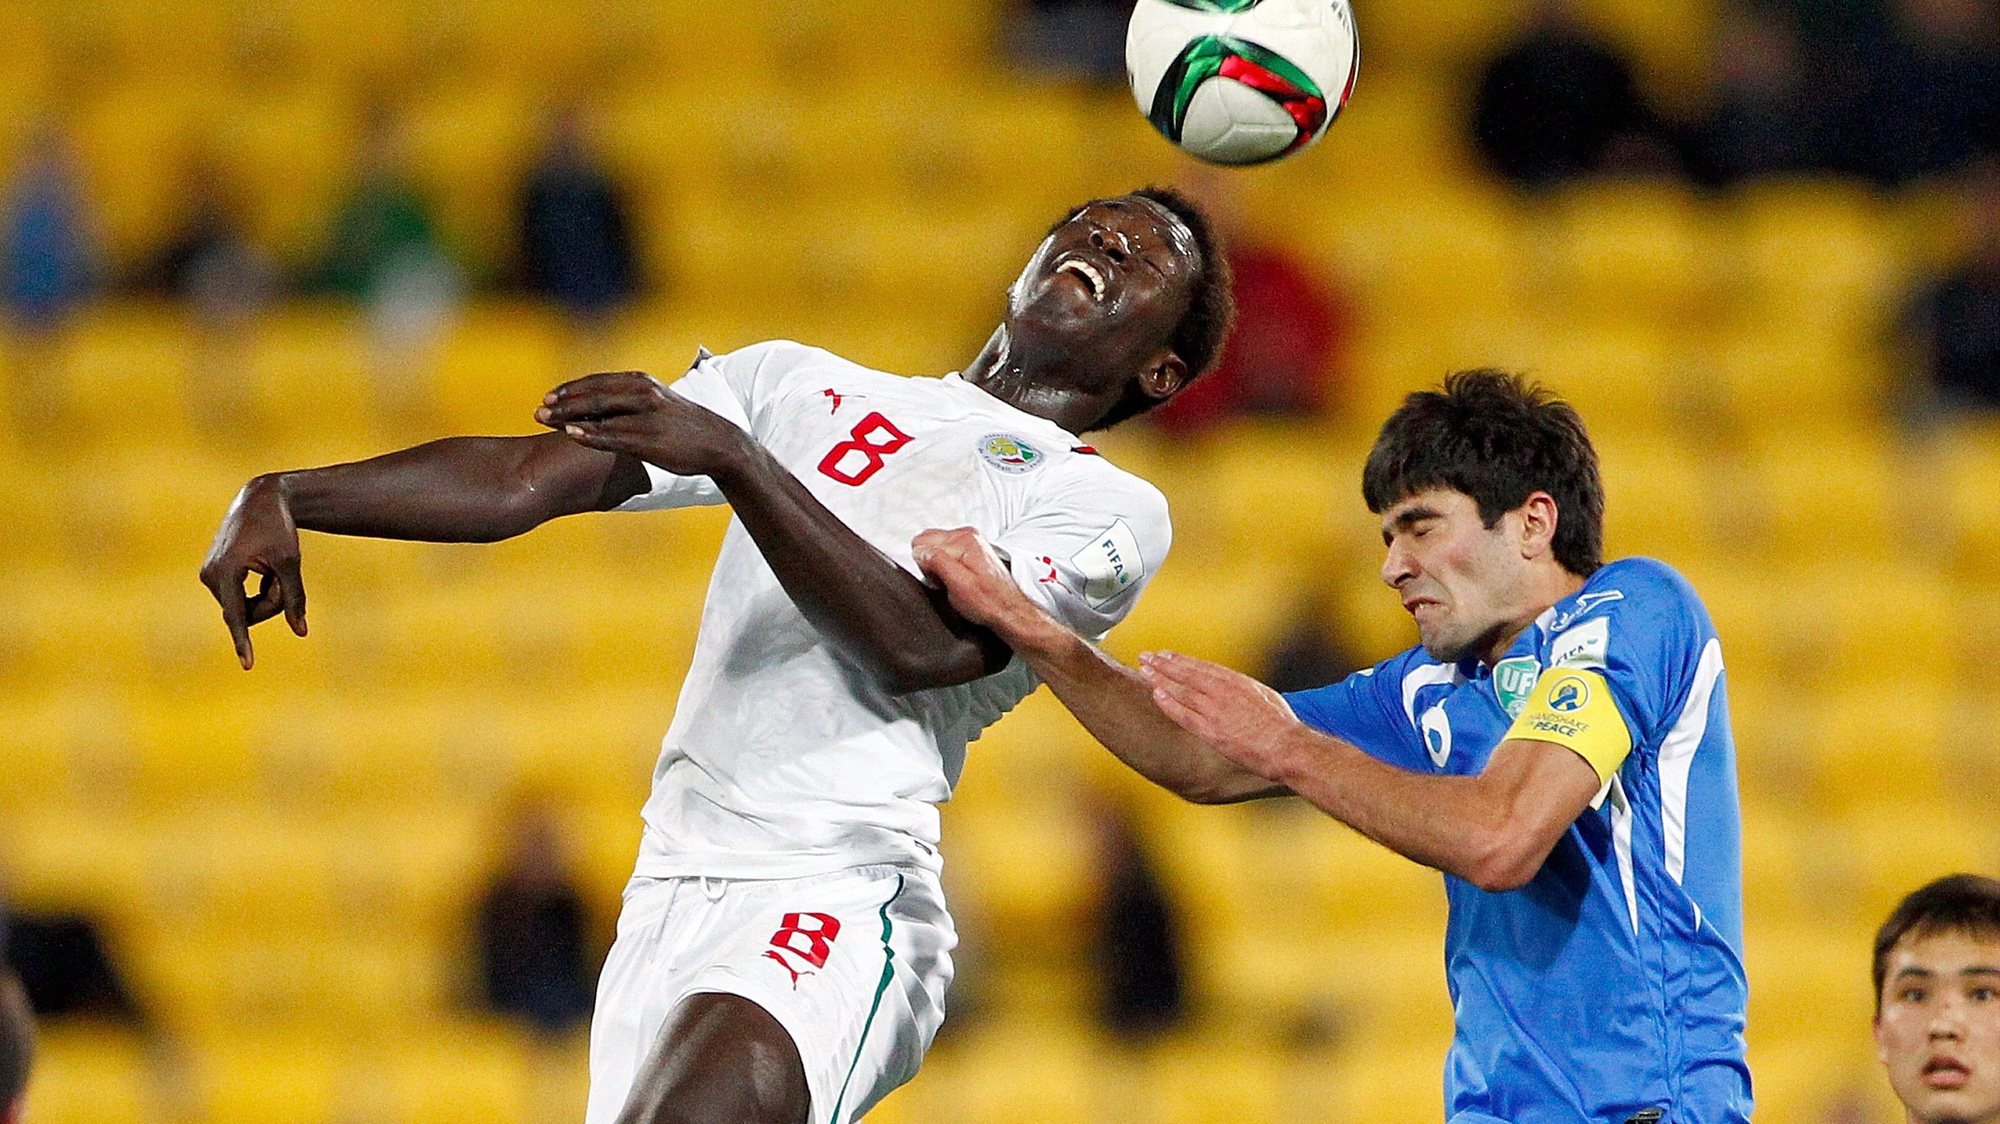 epa04798408 Sidy Sarr of Senegal (L) gets his head to the ball as he jumps in front of Javokhir Sokhibov of Uzbekistan (R) during the FIFA Under-20 World Cup 2015 quarterfinal match between Uzbekistan and Senegal in Wellington, New Zealand, 14 June 2015.  EPA/DEAN PEMBERTON EDITORIAL USE ONLY NOT TO BE USED IN ASSOCATION WITH ANY COMMERCIAL ENTITY - IMAGES MUST NOT BE USED IN ANY FORM OF ALERT OR PUSH SERVICE OF ANY KIND INCLUDING VIA MOBILE ALERT SERVICES, DOWNLOADS TO MOBILE DEVICES OR MMS MESSAGING